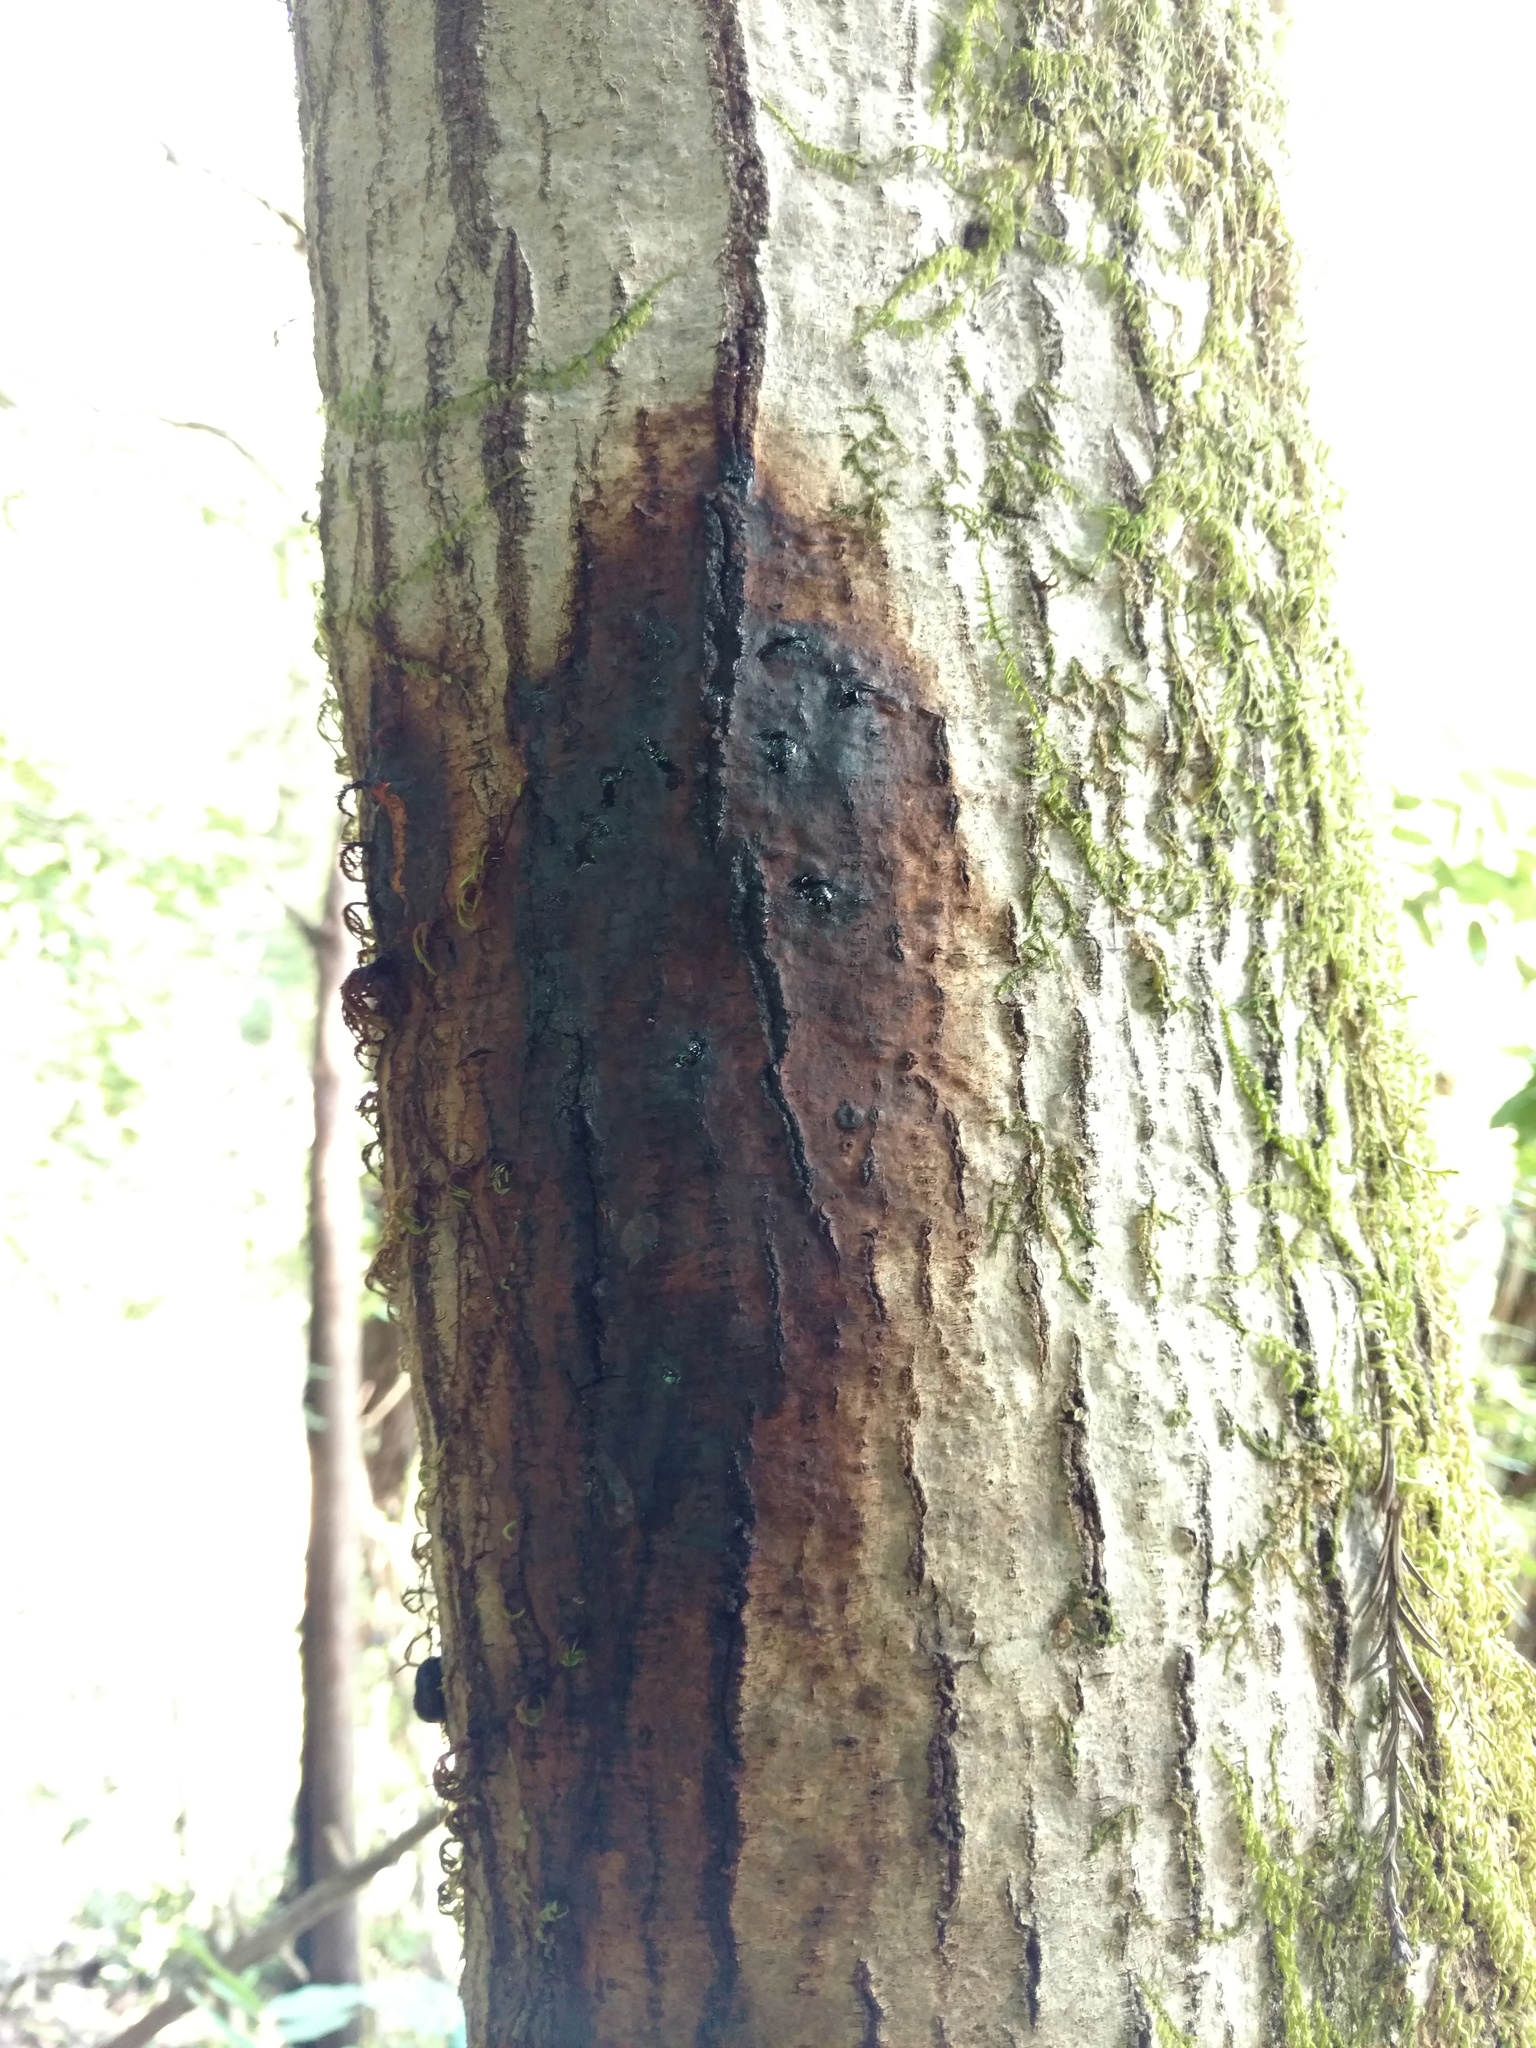 The trunk of a tanoak with a large reddish blotch, oozing a dark liquid from a few places. 